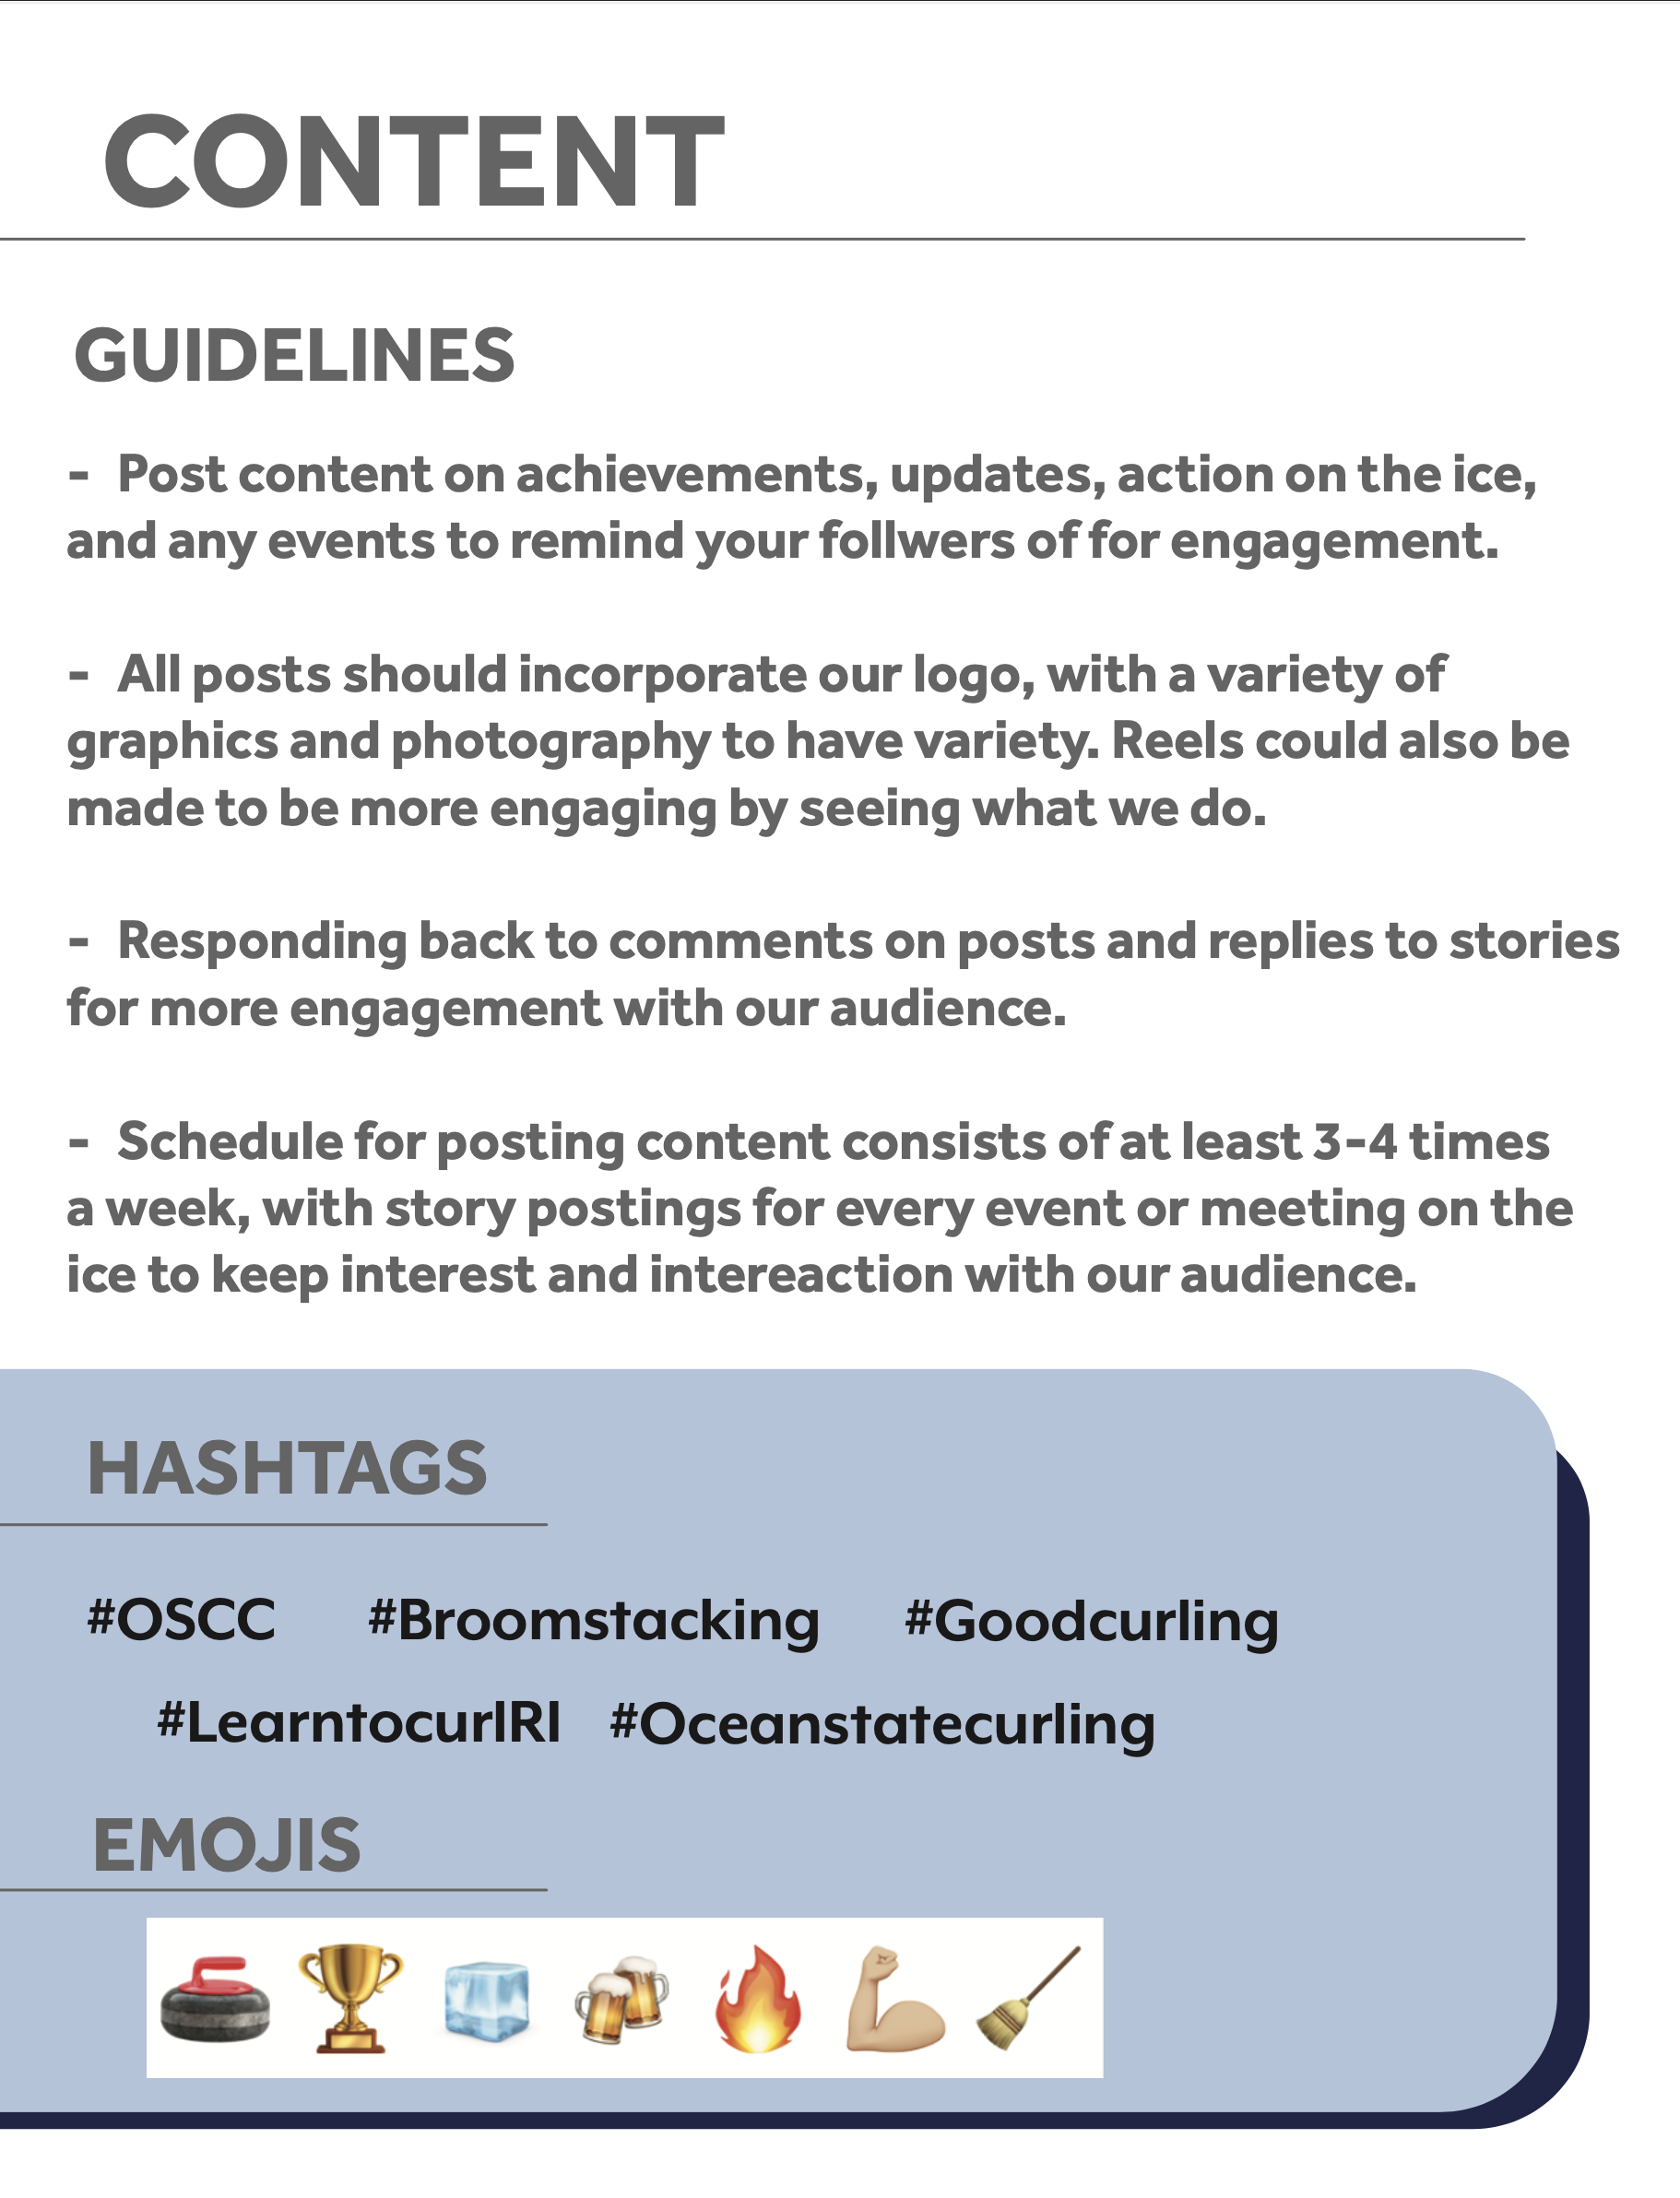 OSCC style guide content guidelines and emojis/hashtags for their Instagram page